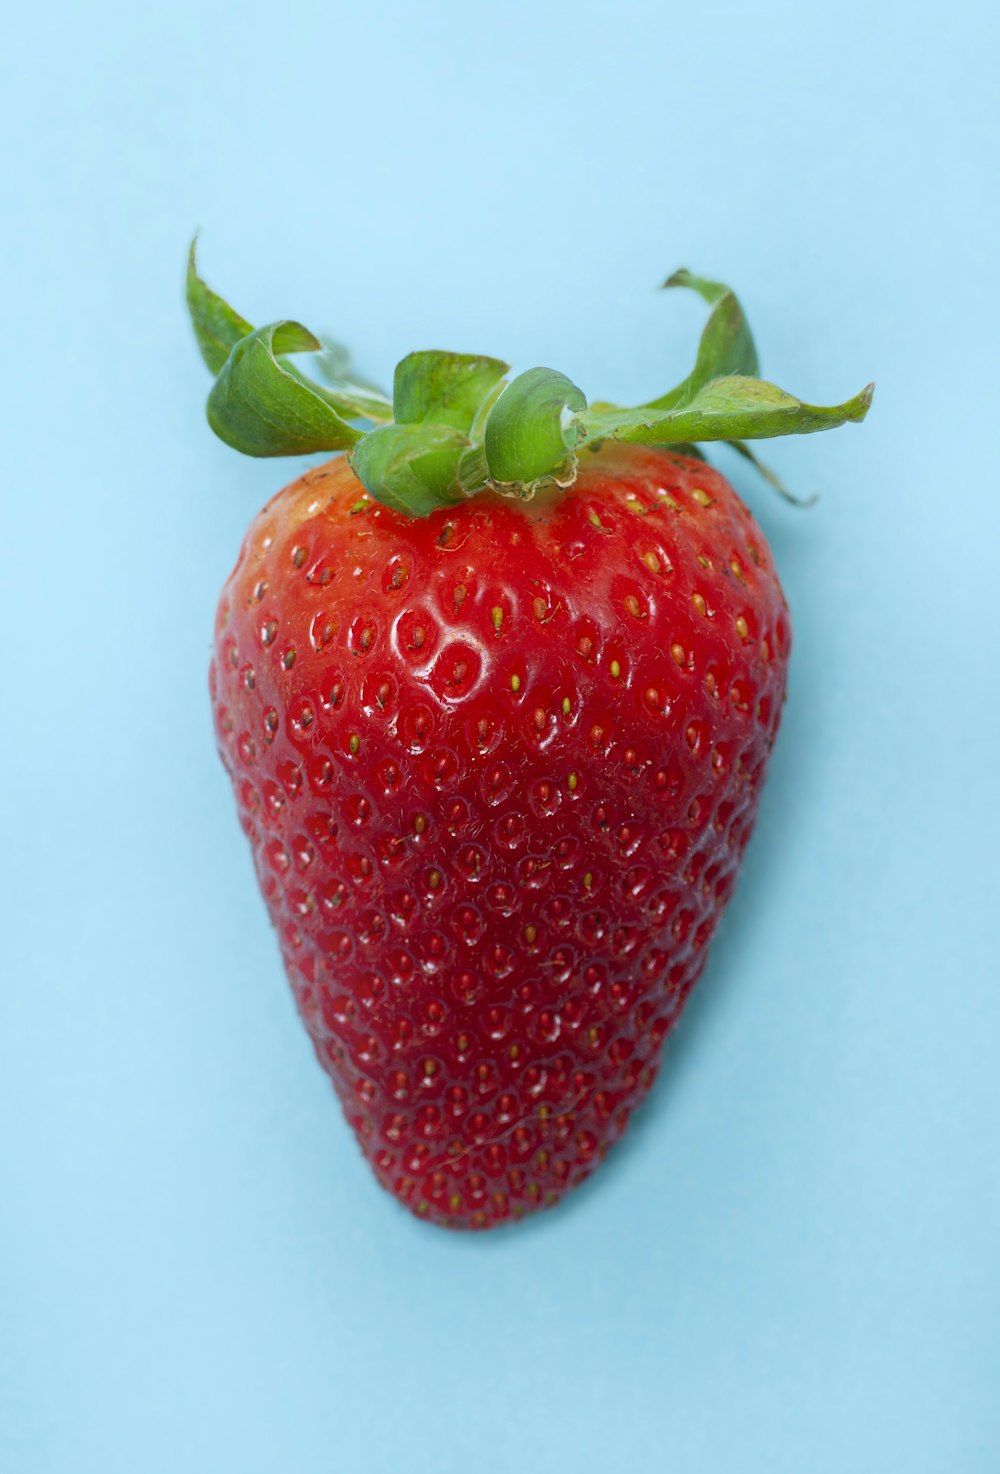 a close up of a strawberry on a blue background